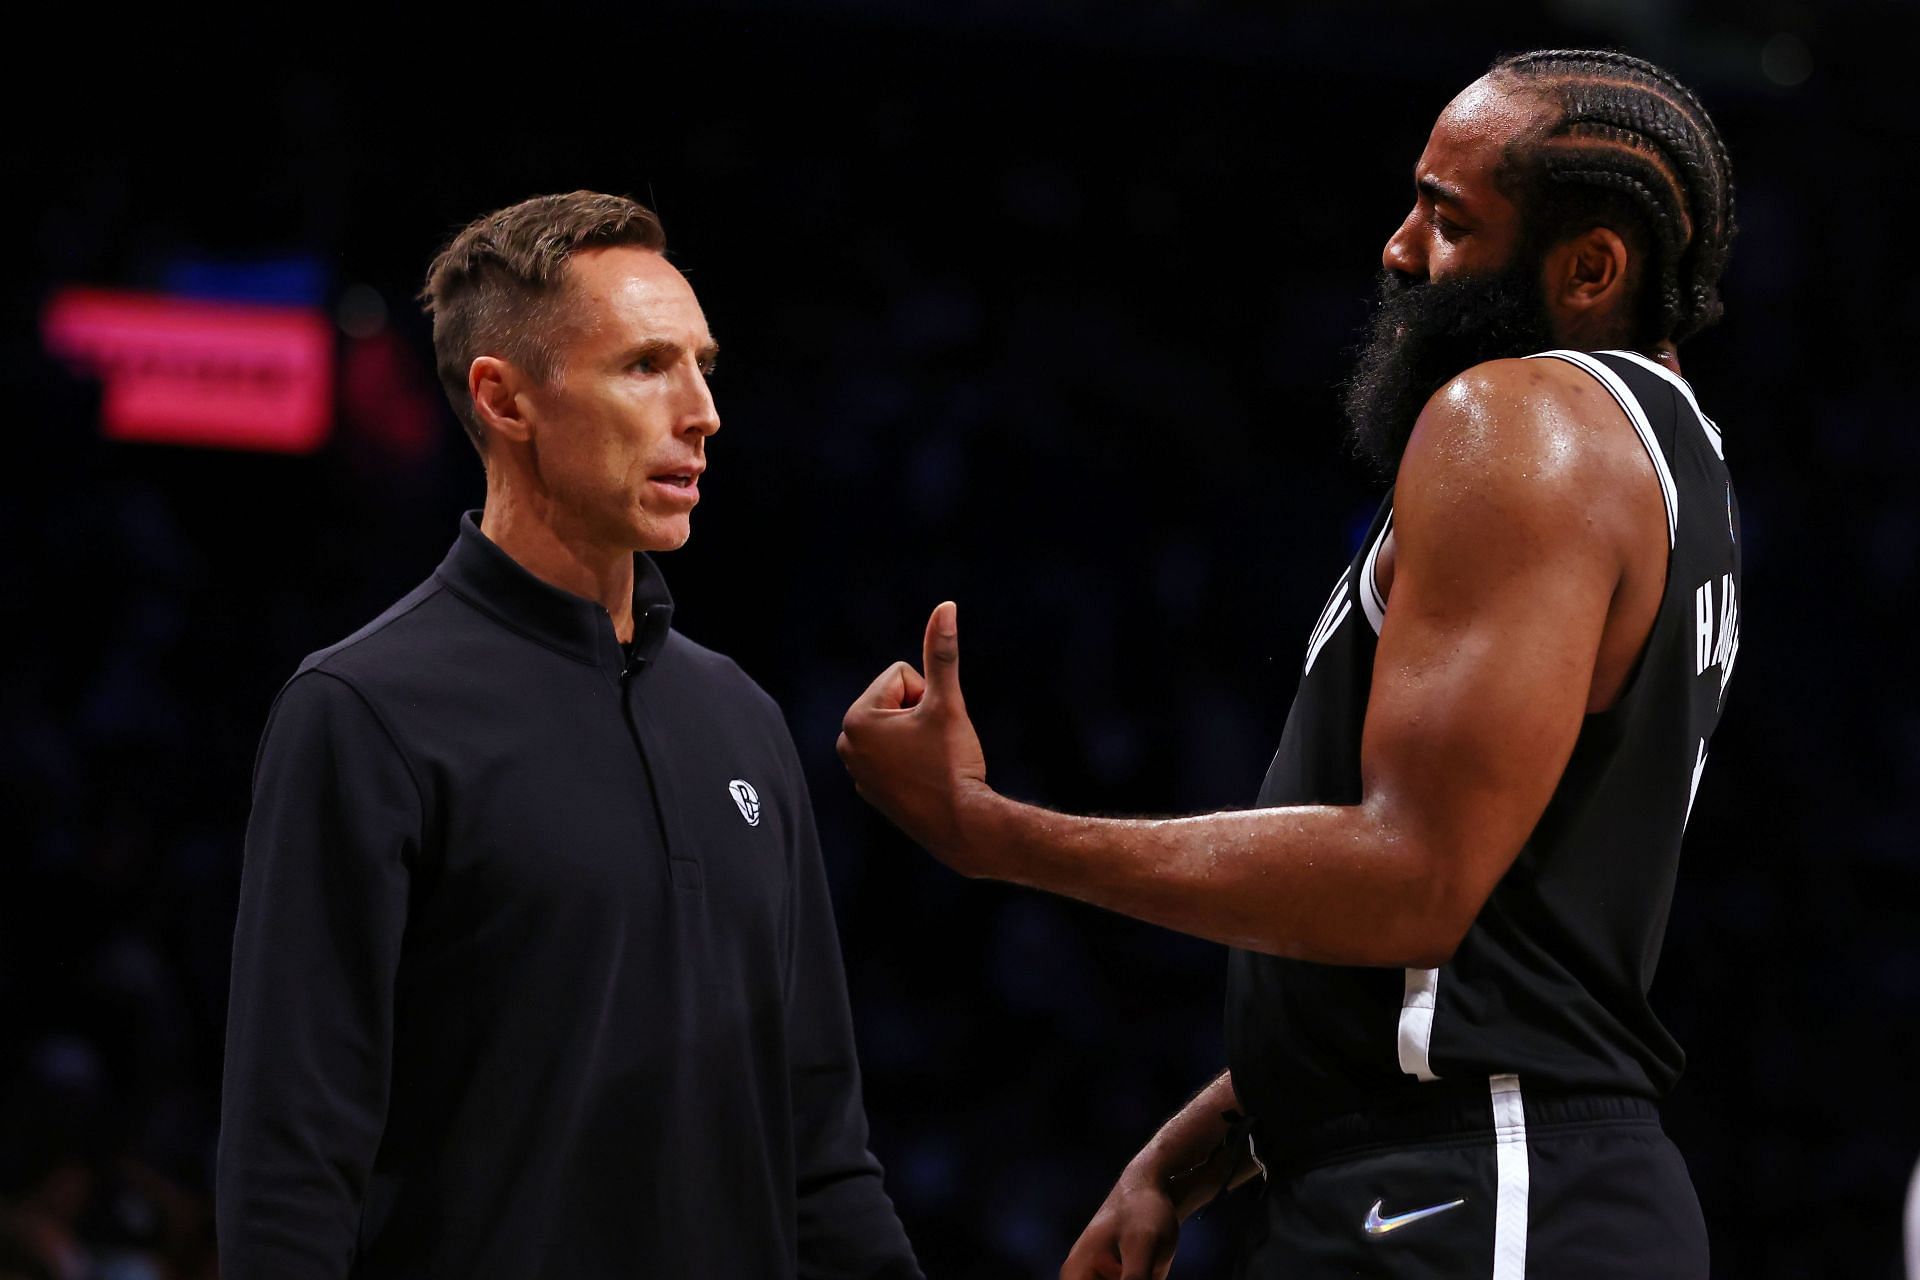 Brooklyn Nets superstar James Harden in a discussion with head coach Steve Nash